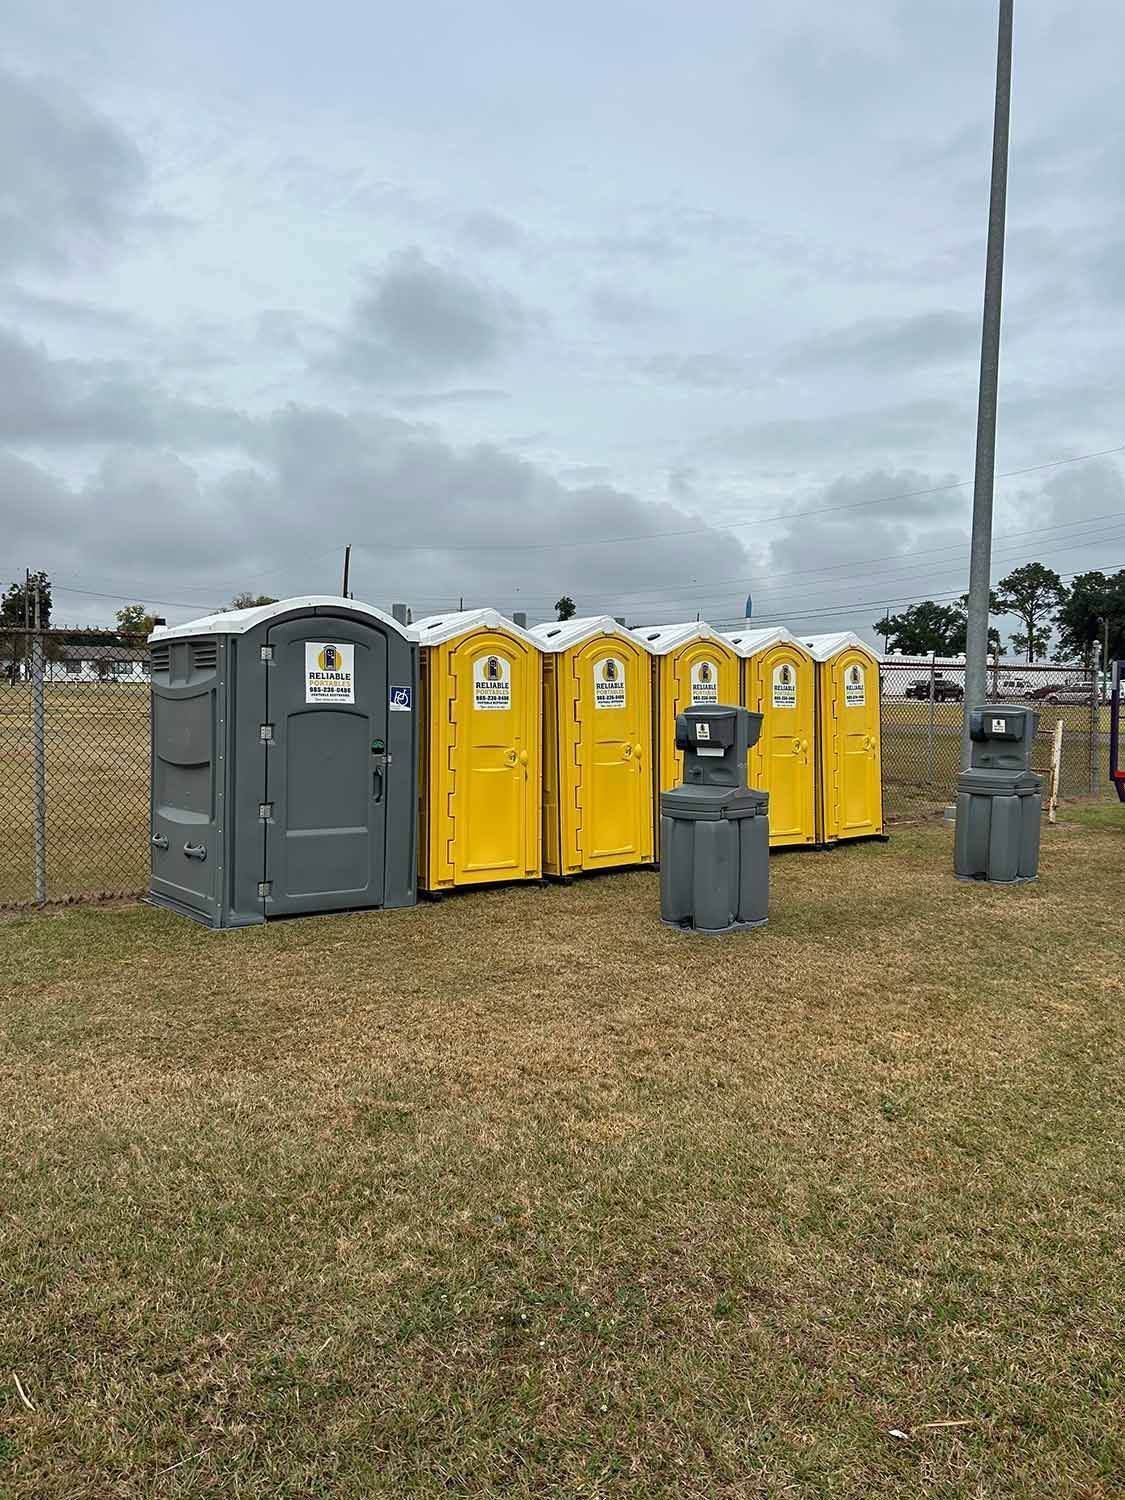 A row of portable toilets are lined up in a field.